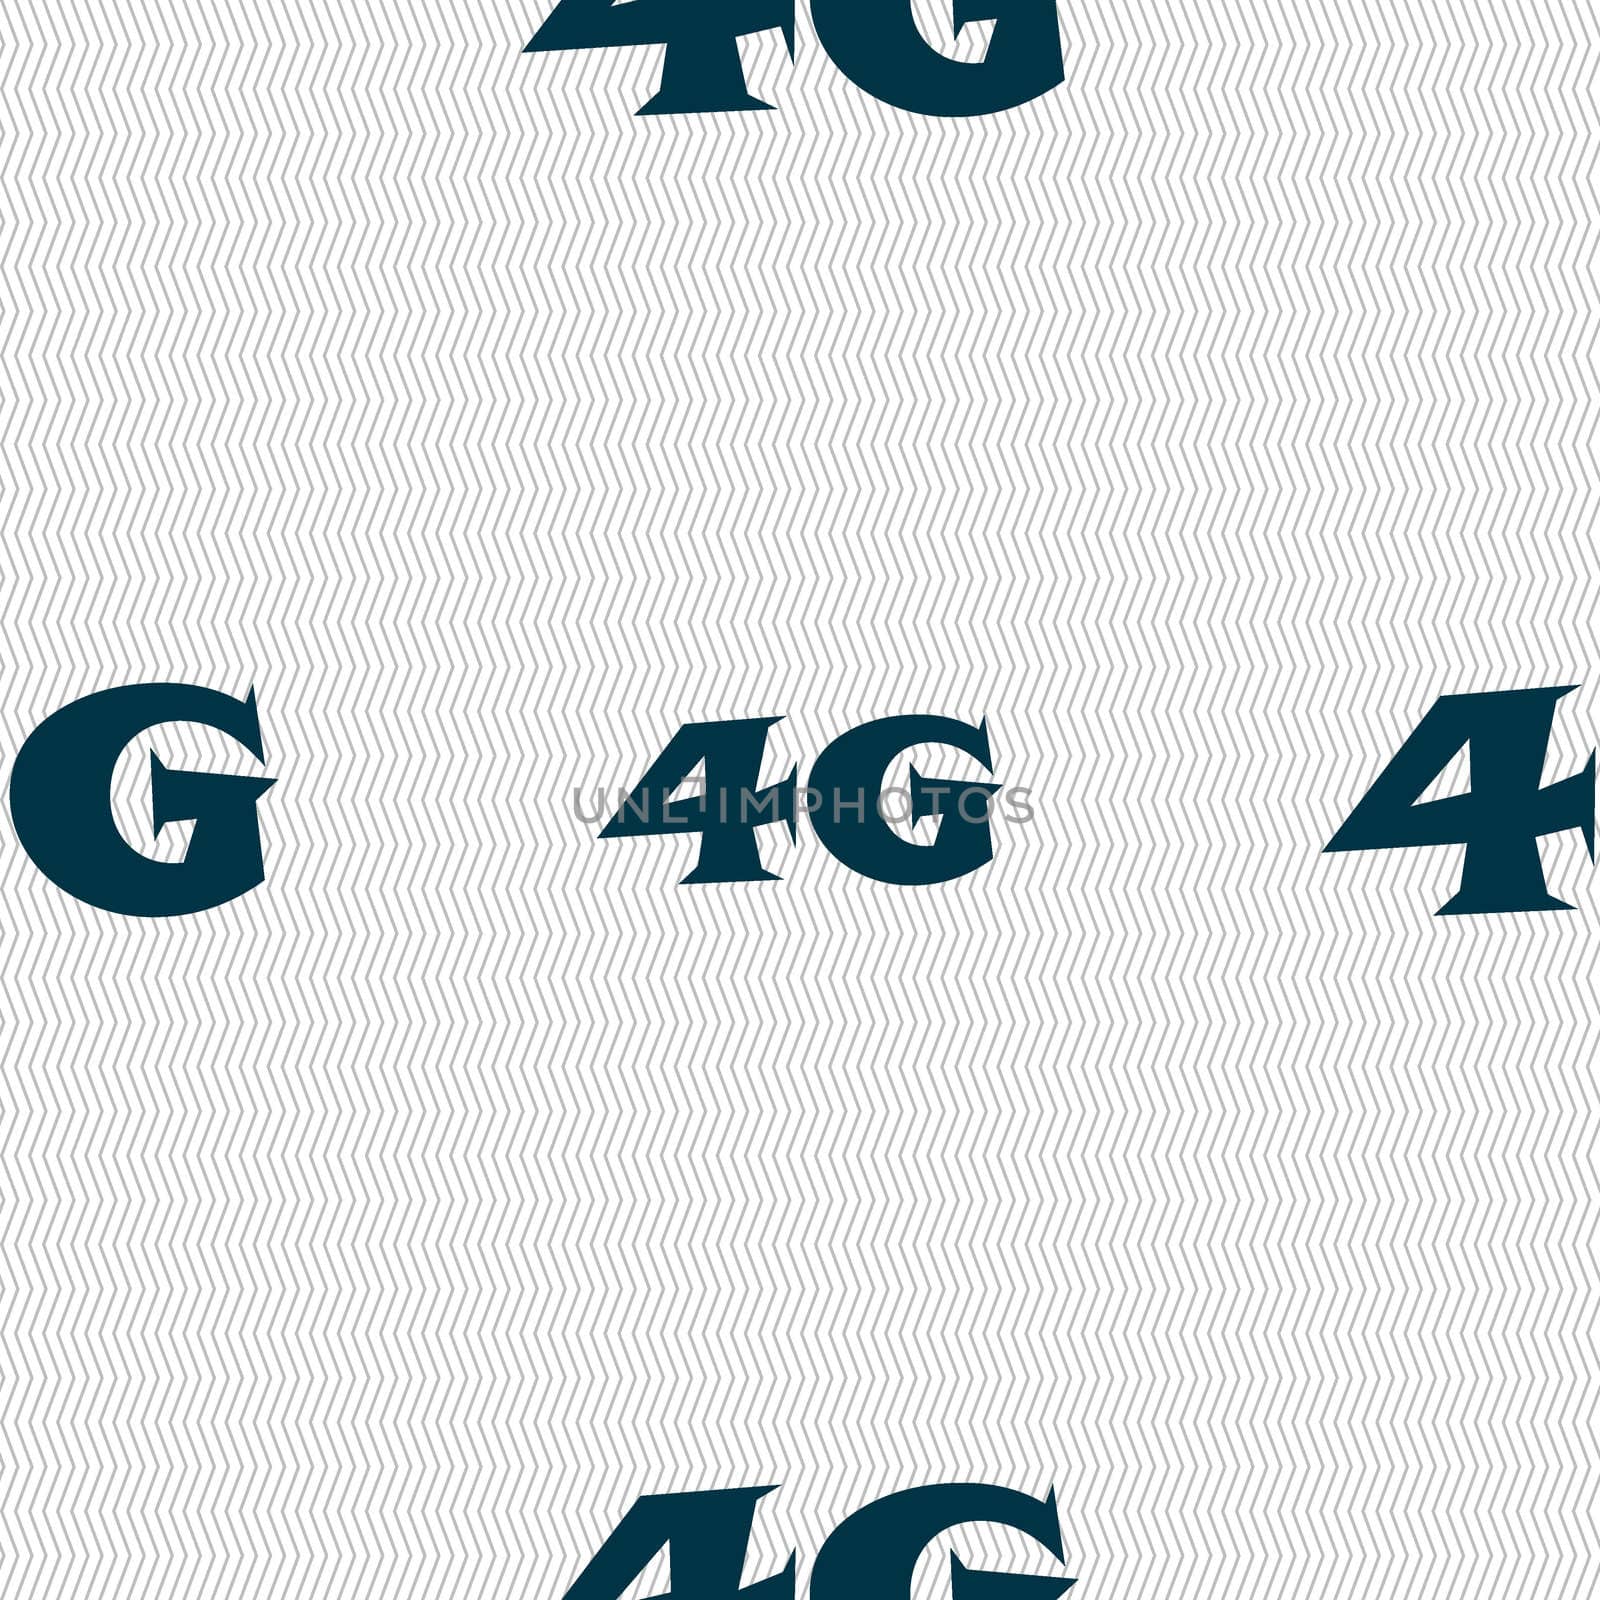 4G sign icon. Mobile telecommunications technology symbol. Seamless abstract background with geometric shapes. illustration